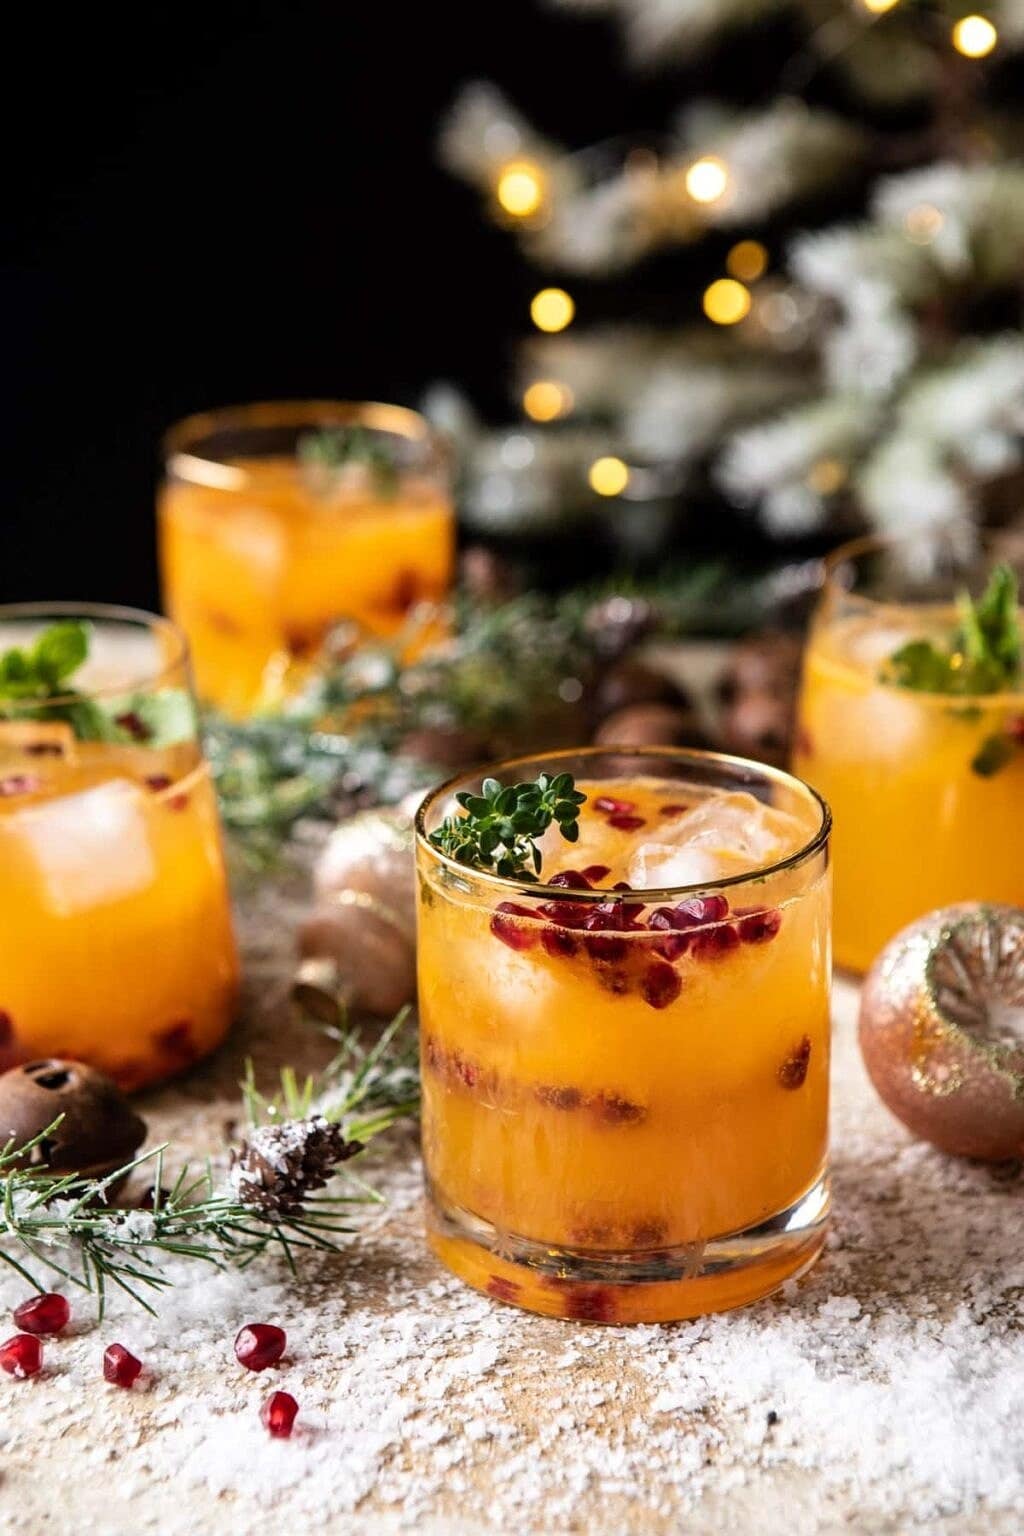 8 Special Occasion Cocktails That Taste Like Christmas